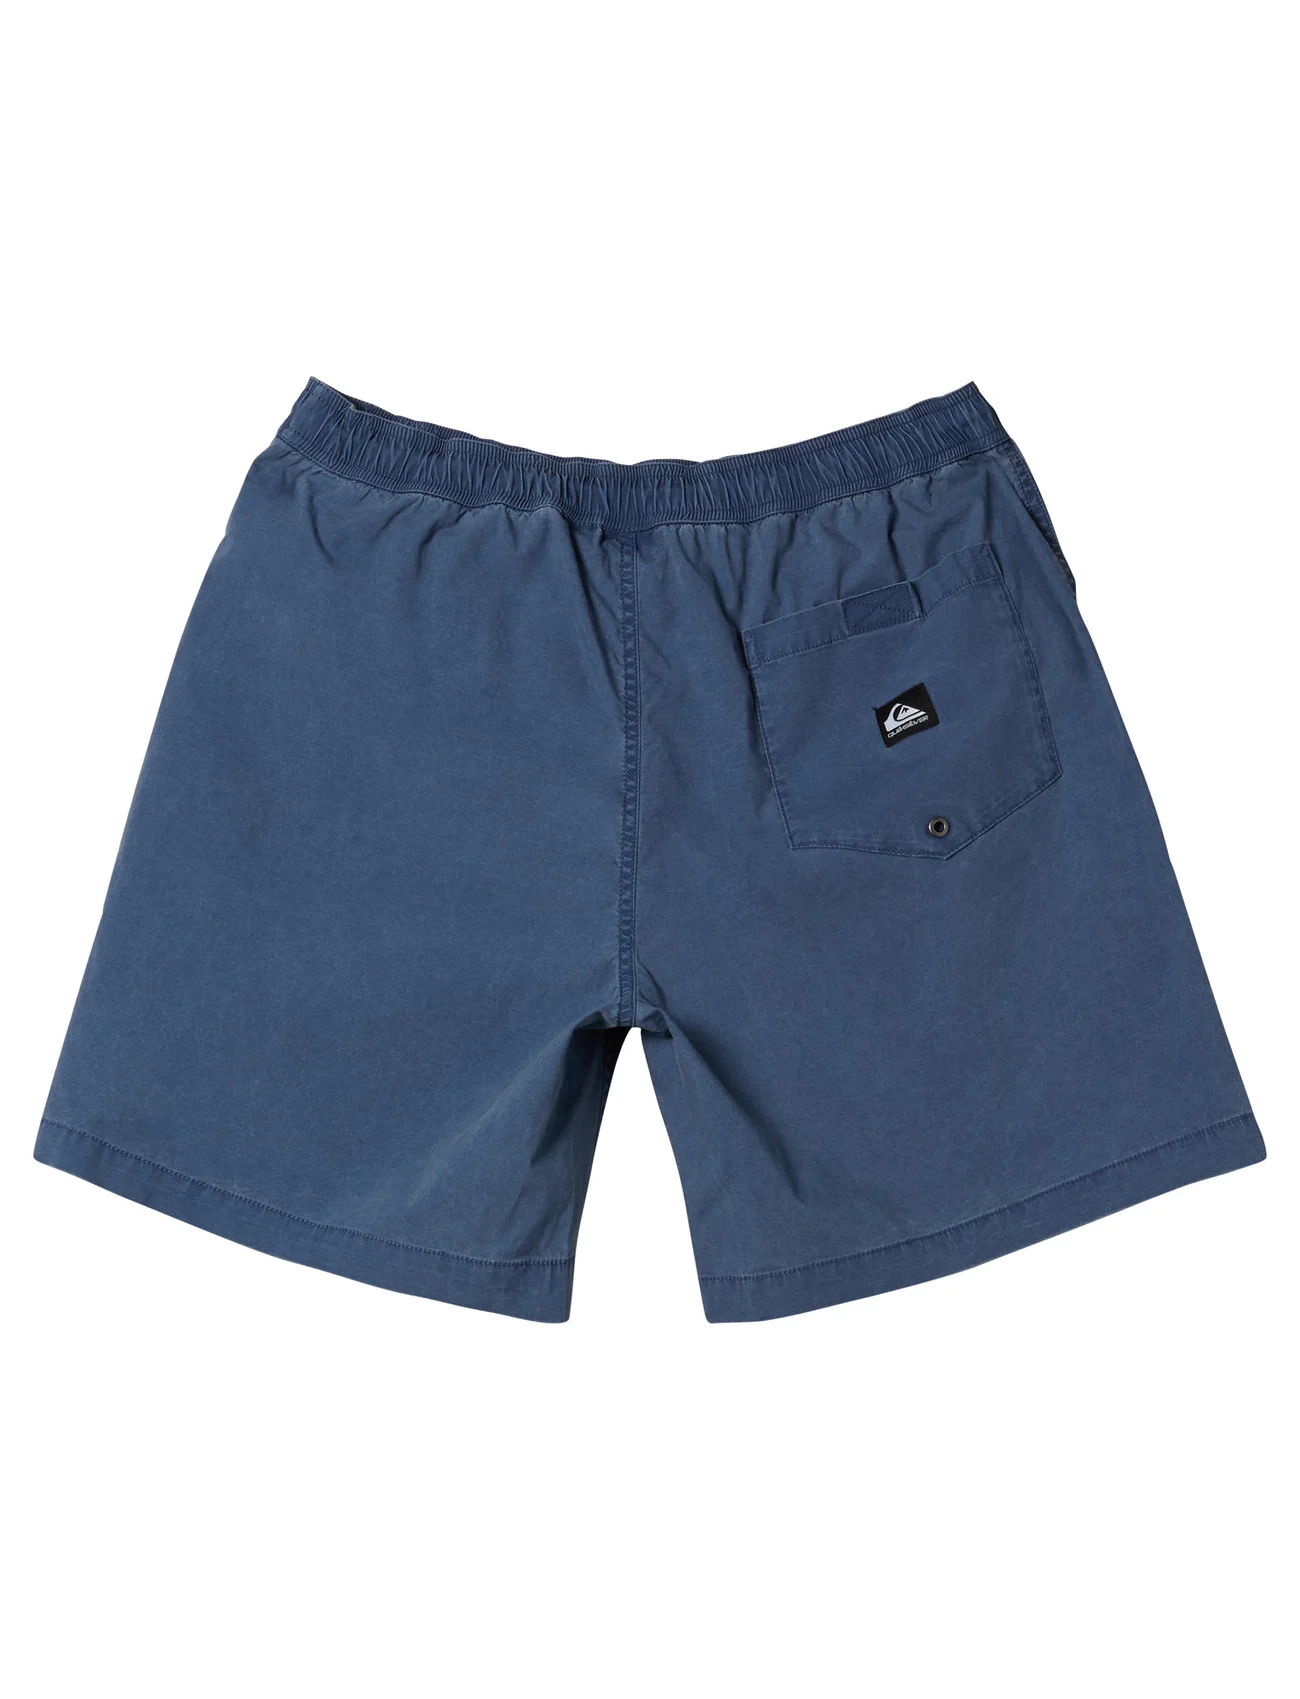 Quiksilver - TAXER - sports shorts - crown blue - 1